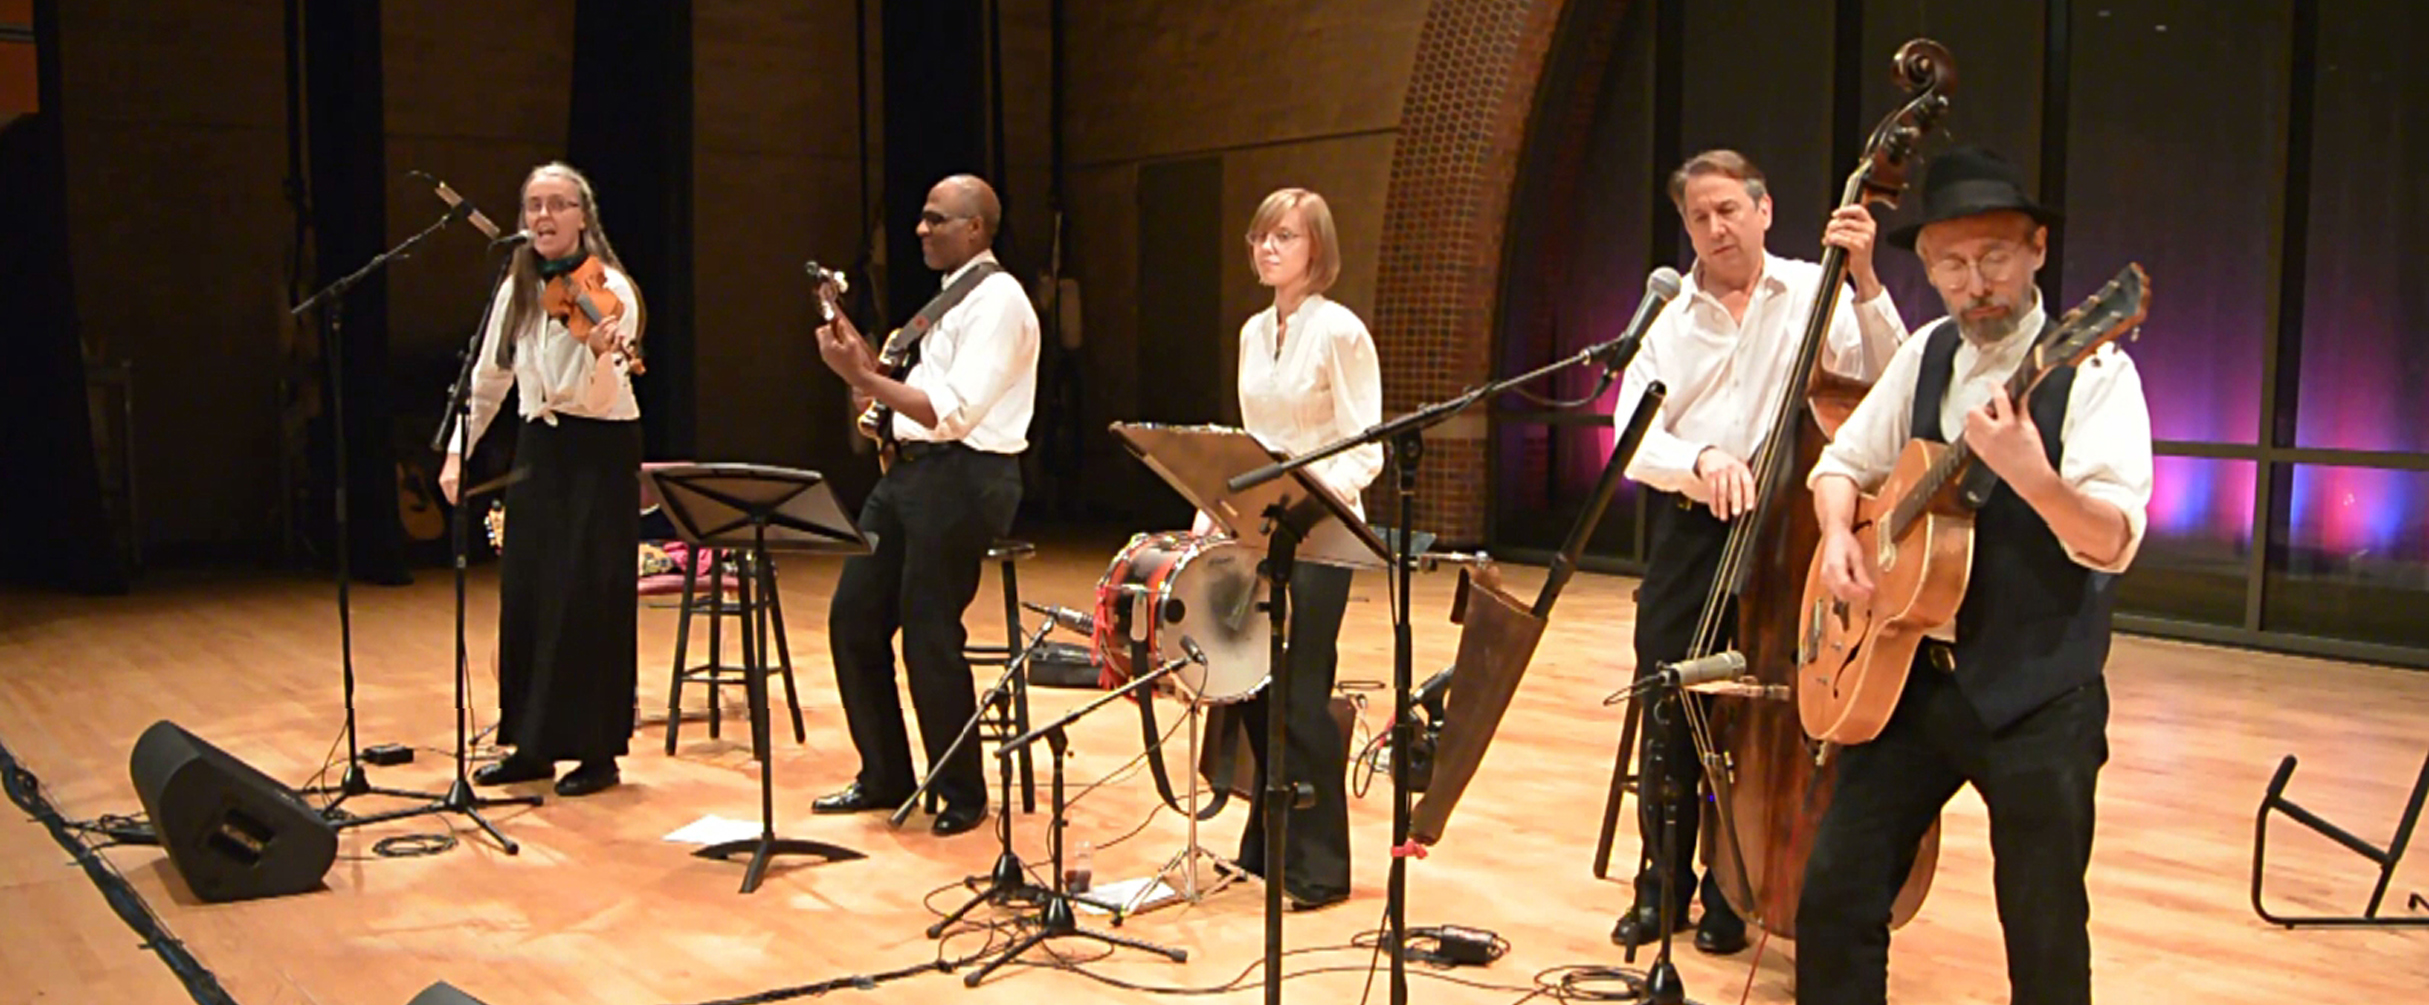 Photo of the Hi-Dukes performing as a quintet on stage at the University of St. Louis